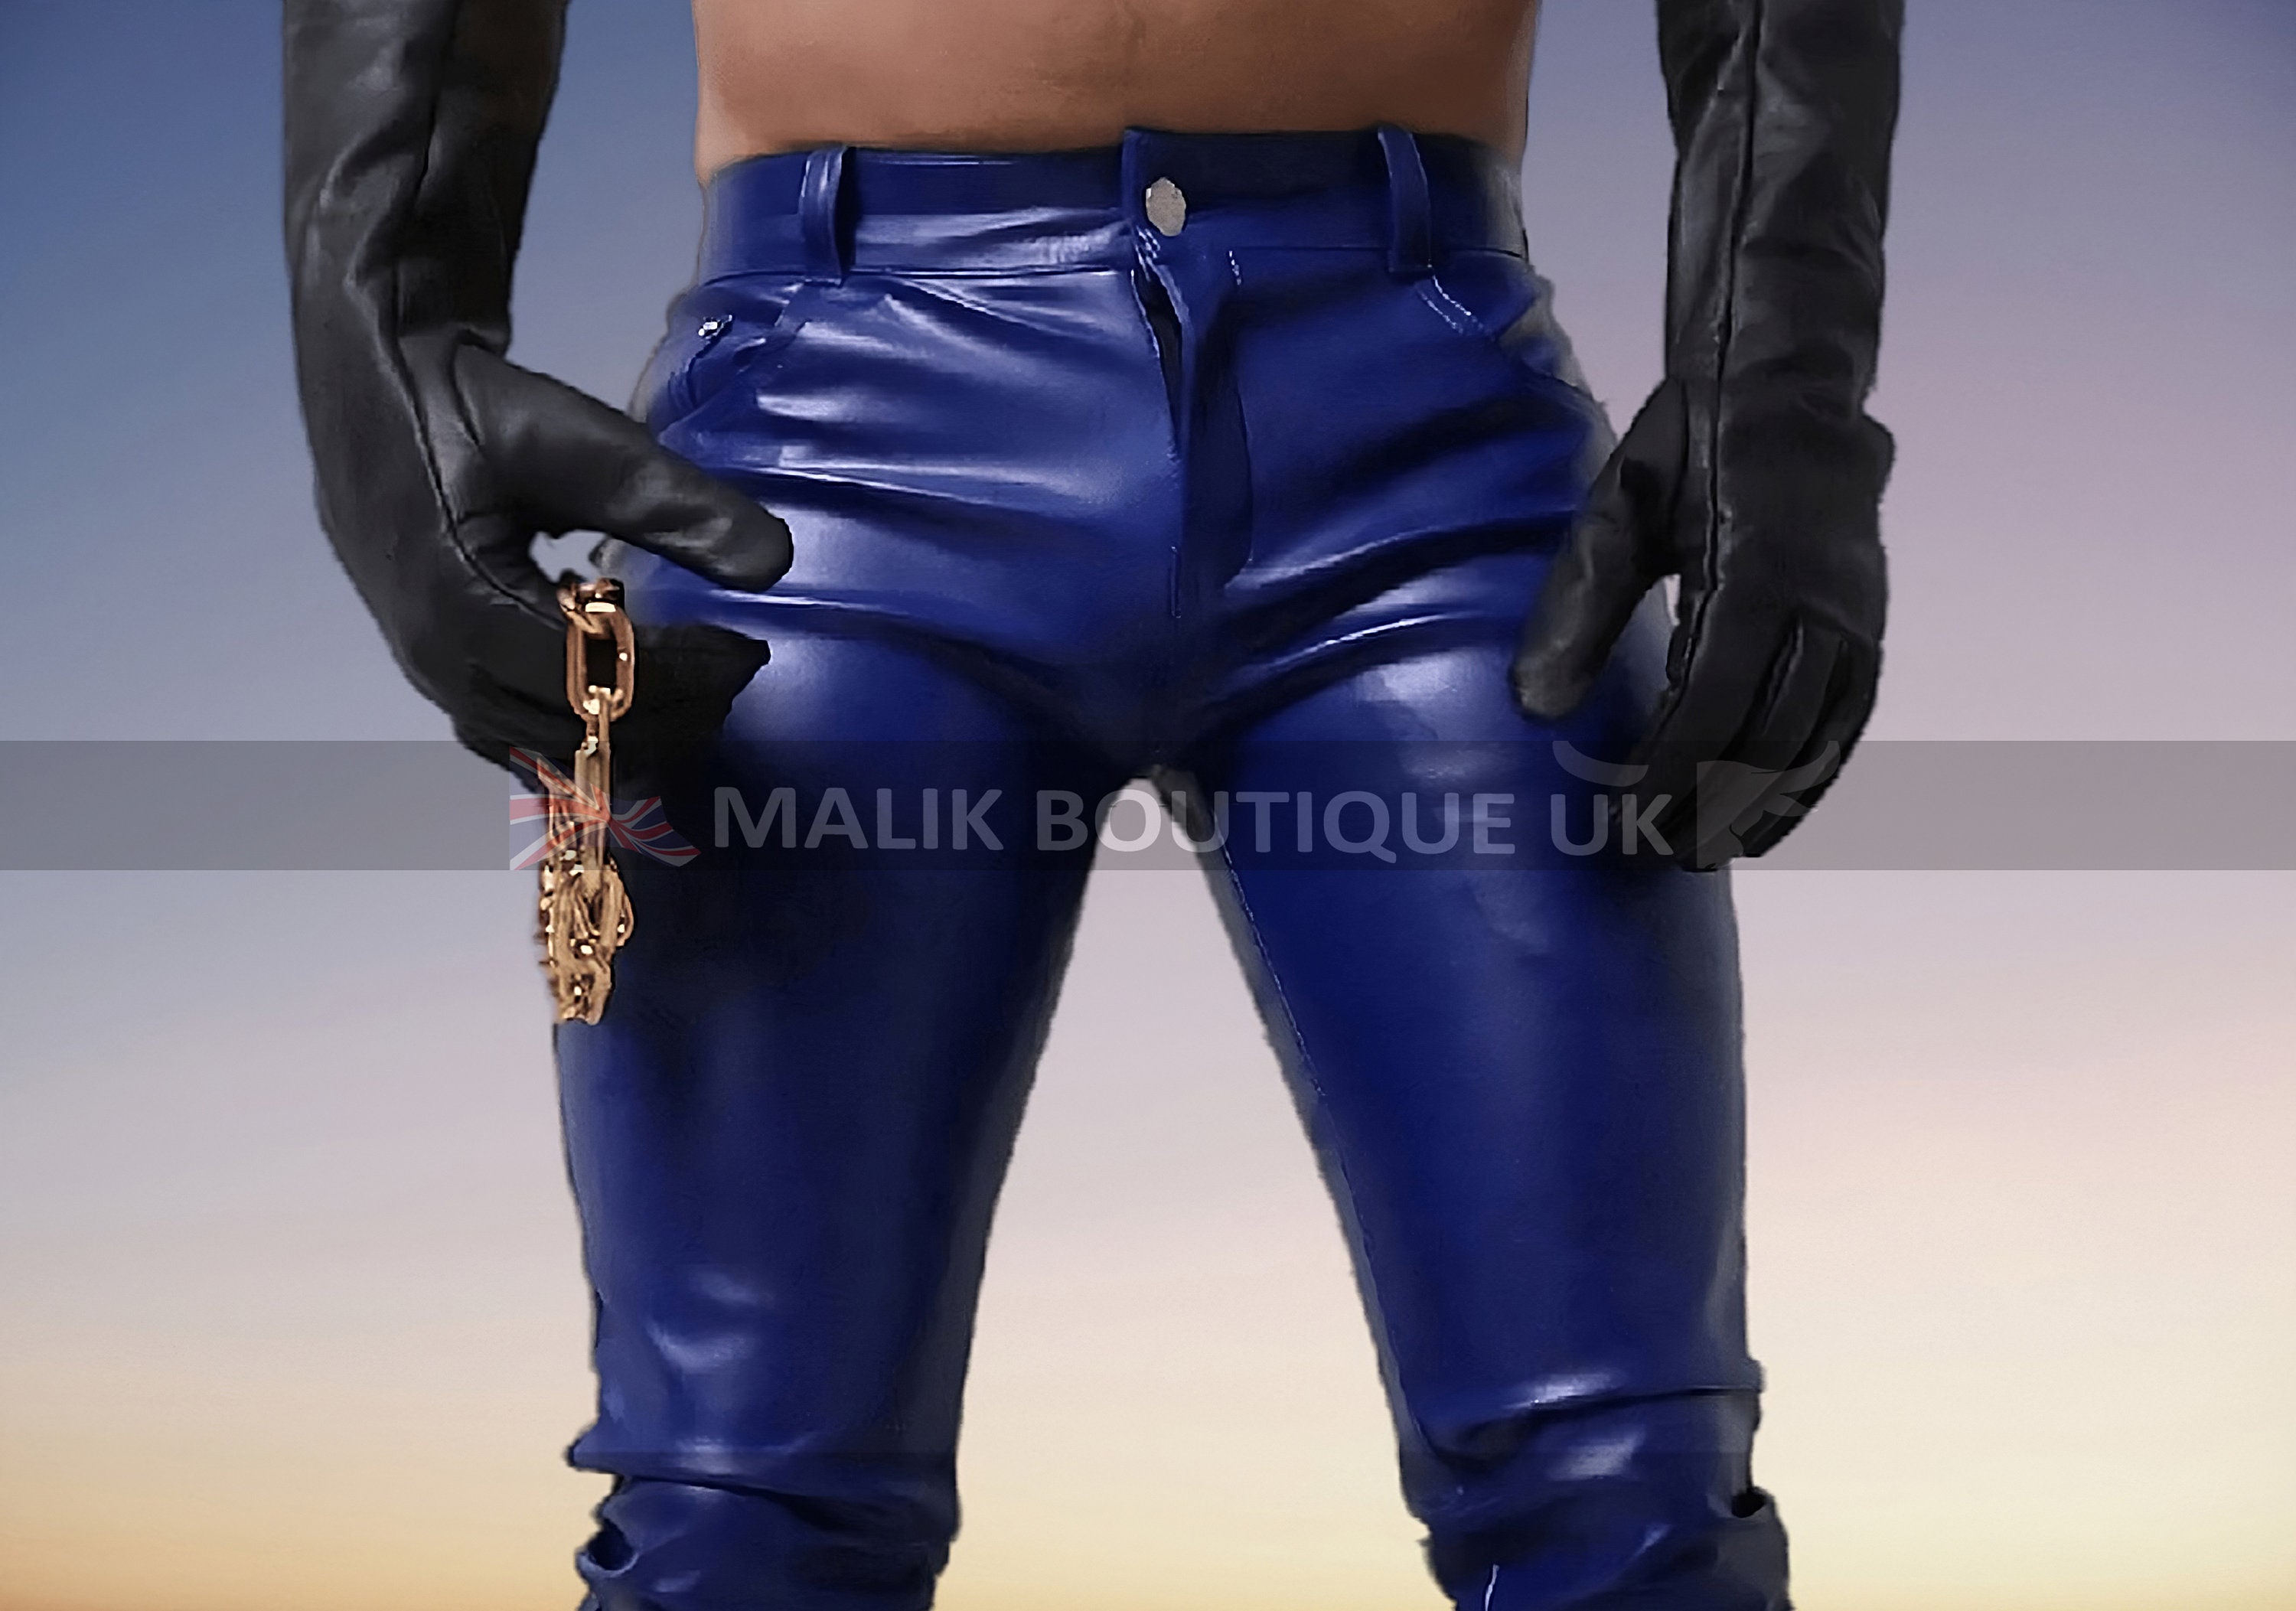 Shiny PVC trousers and beautiful blue leather gloves  Life in Leather